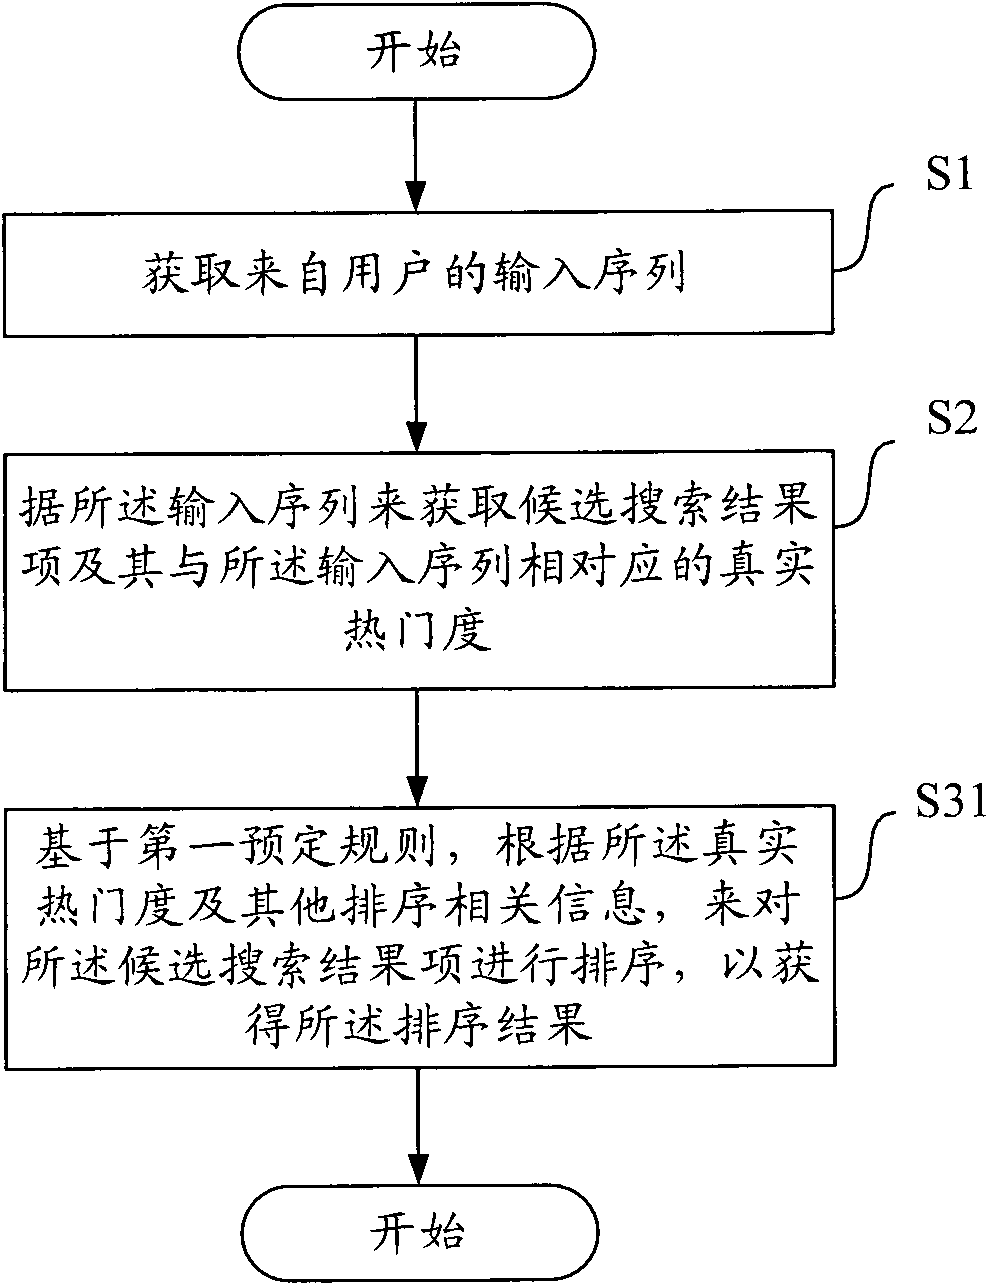 Method, device and equipment for improving search result based on user behaviors